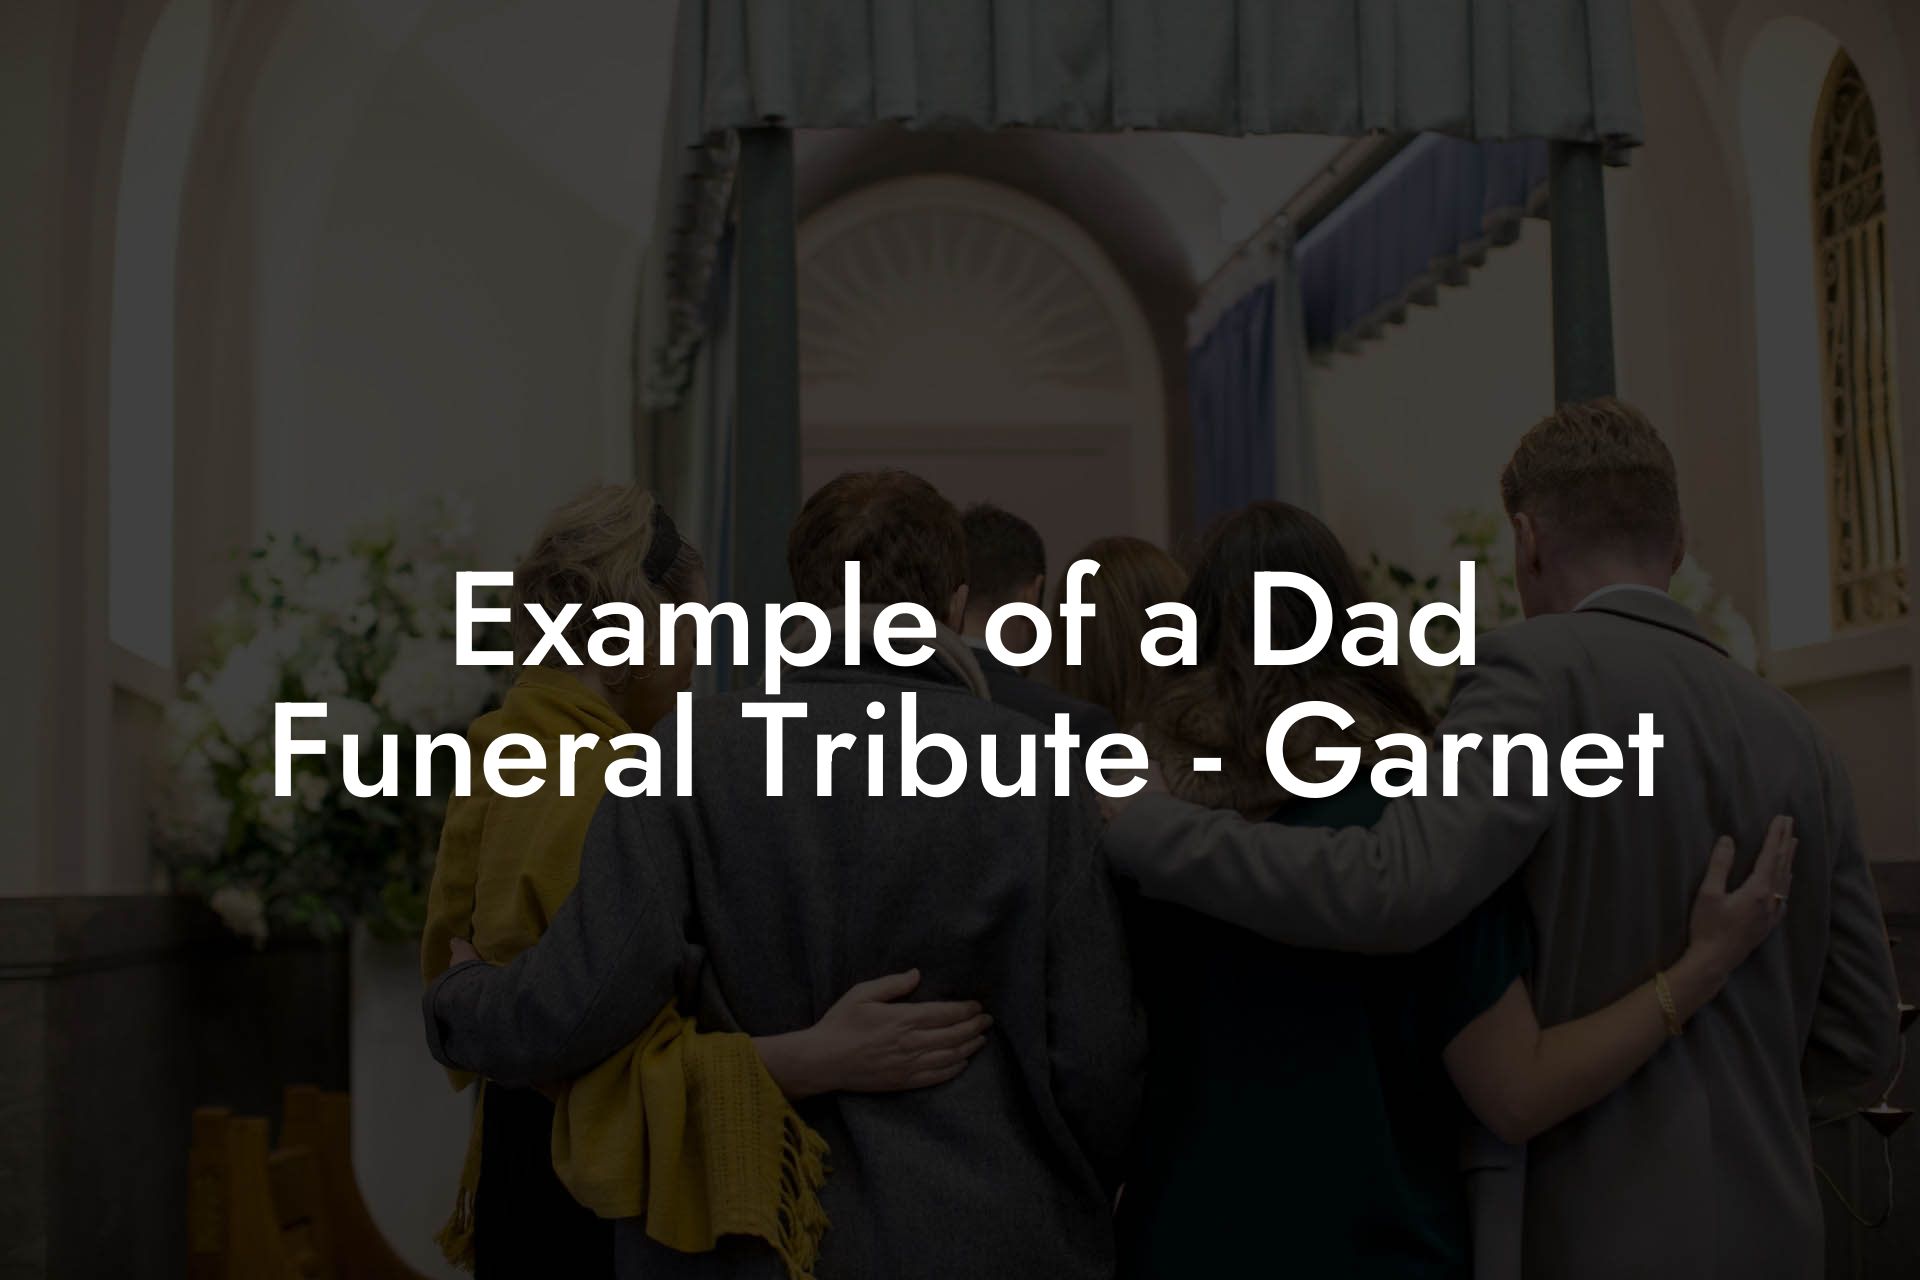 Example of a Dad Funeral Tribute - Garnet